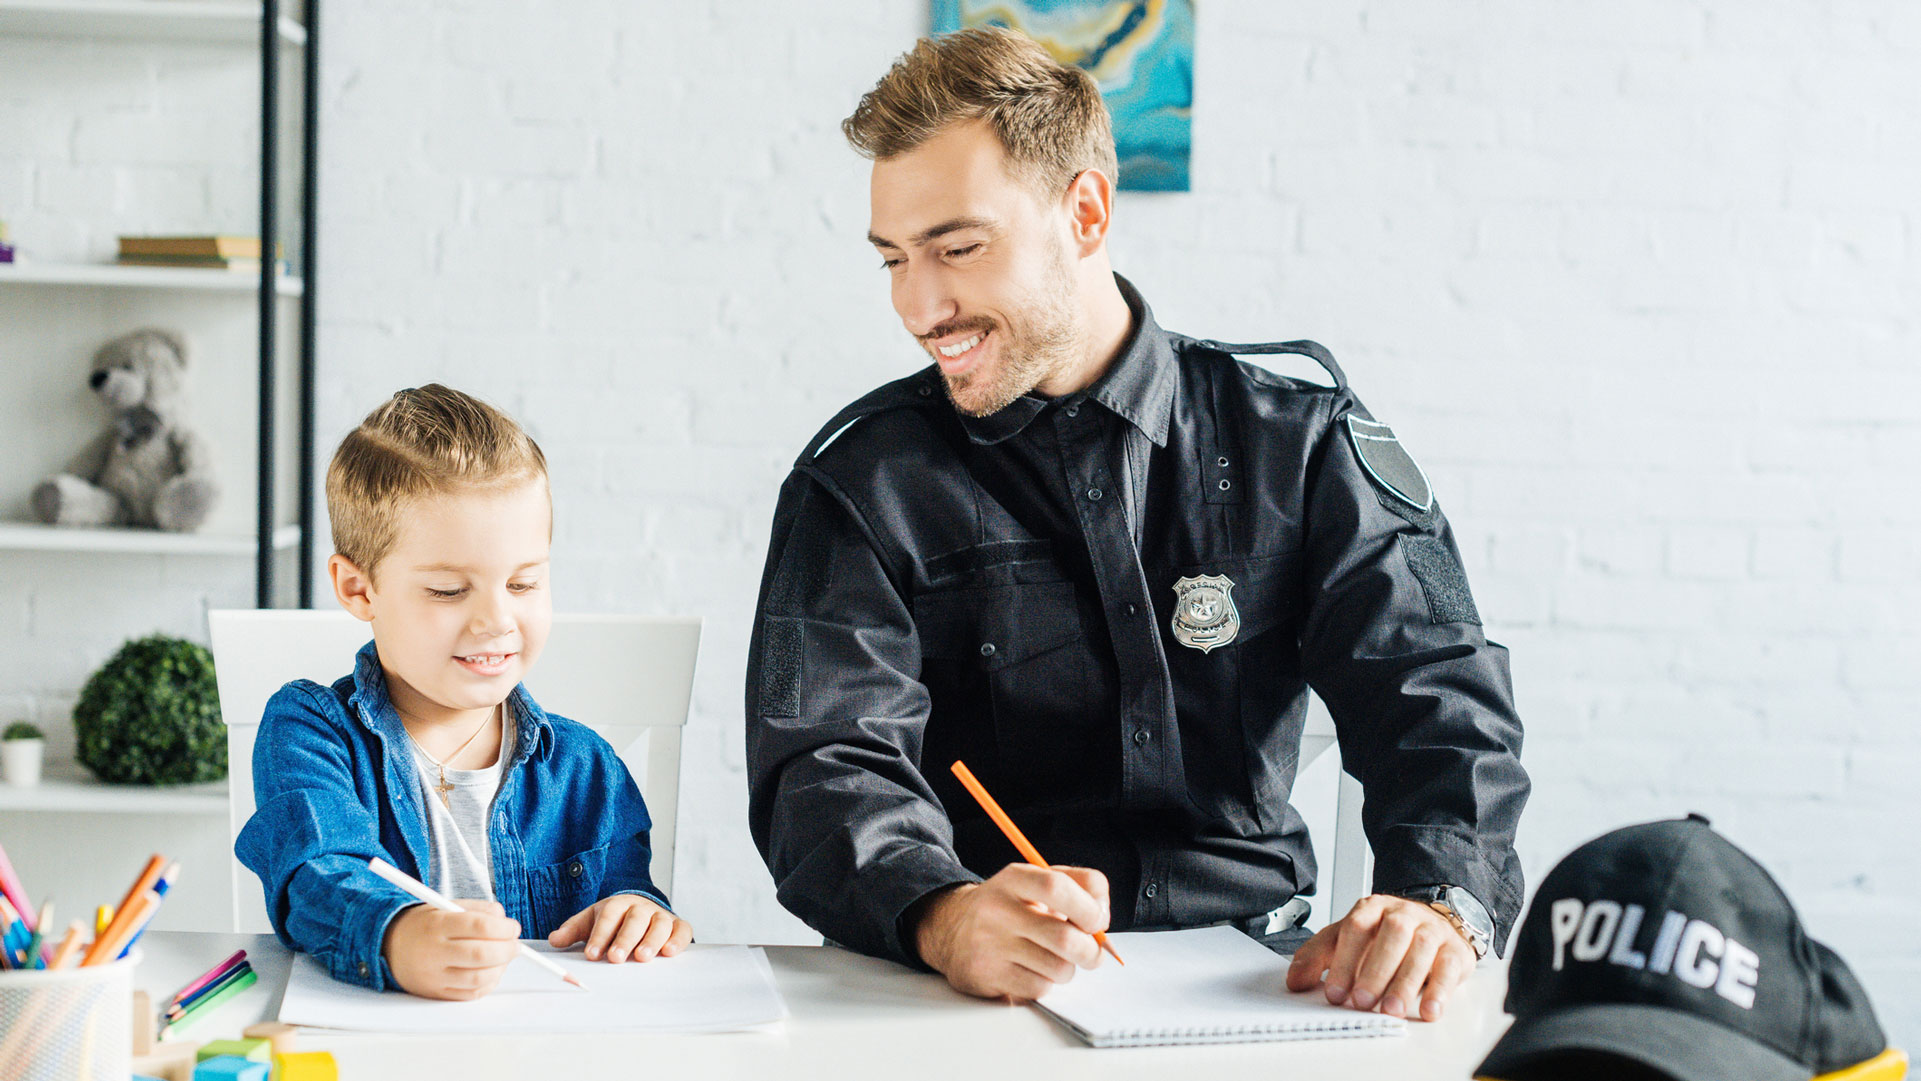 Student and police officer smiling and sitting at table